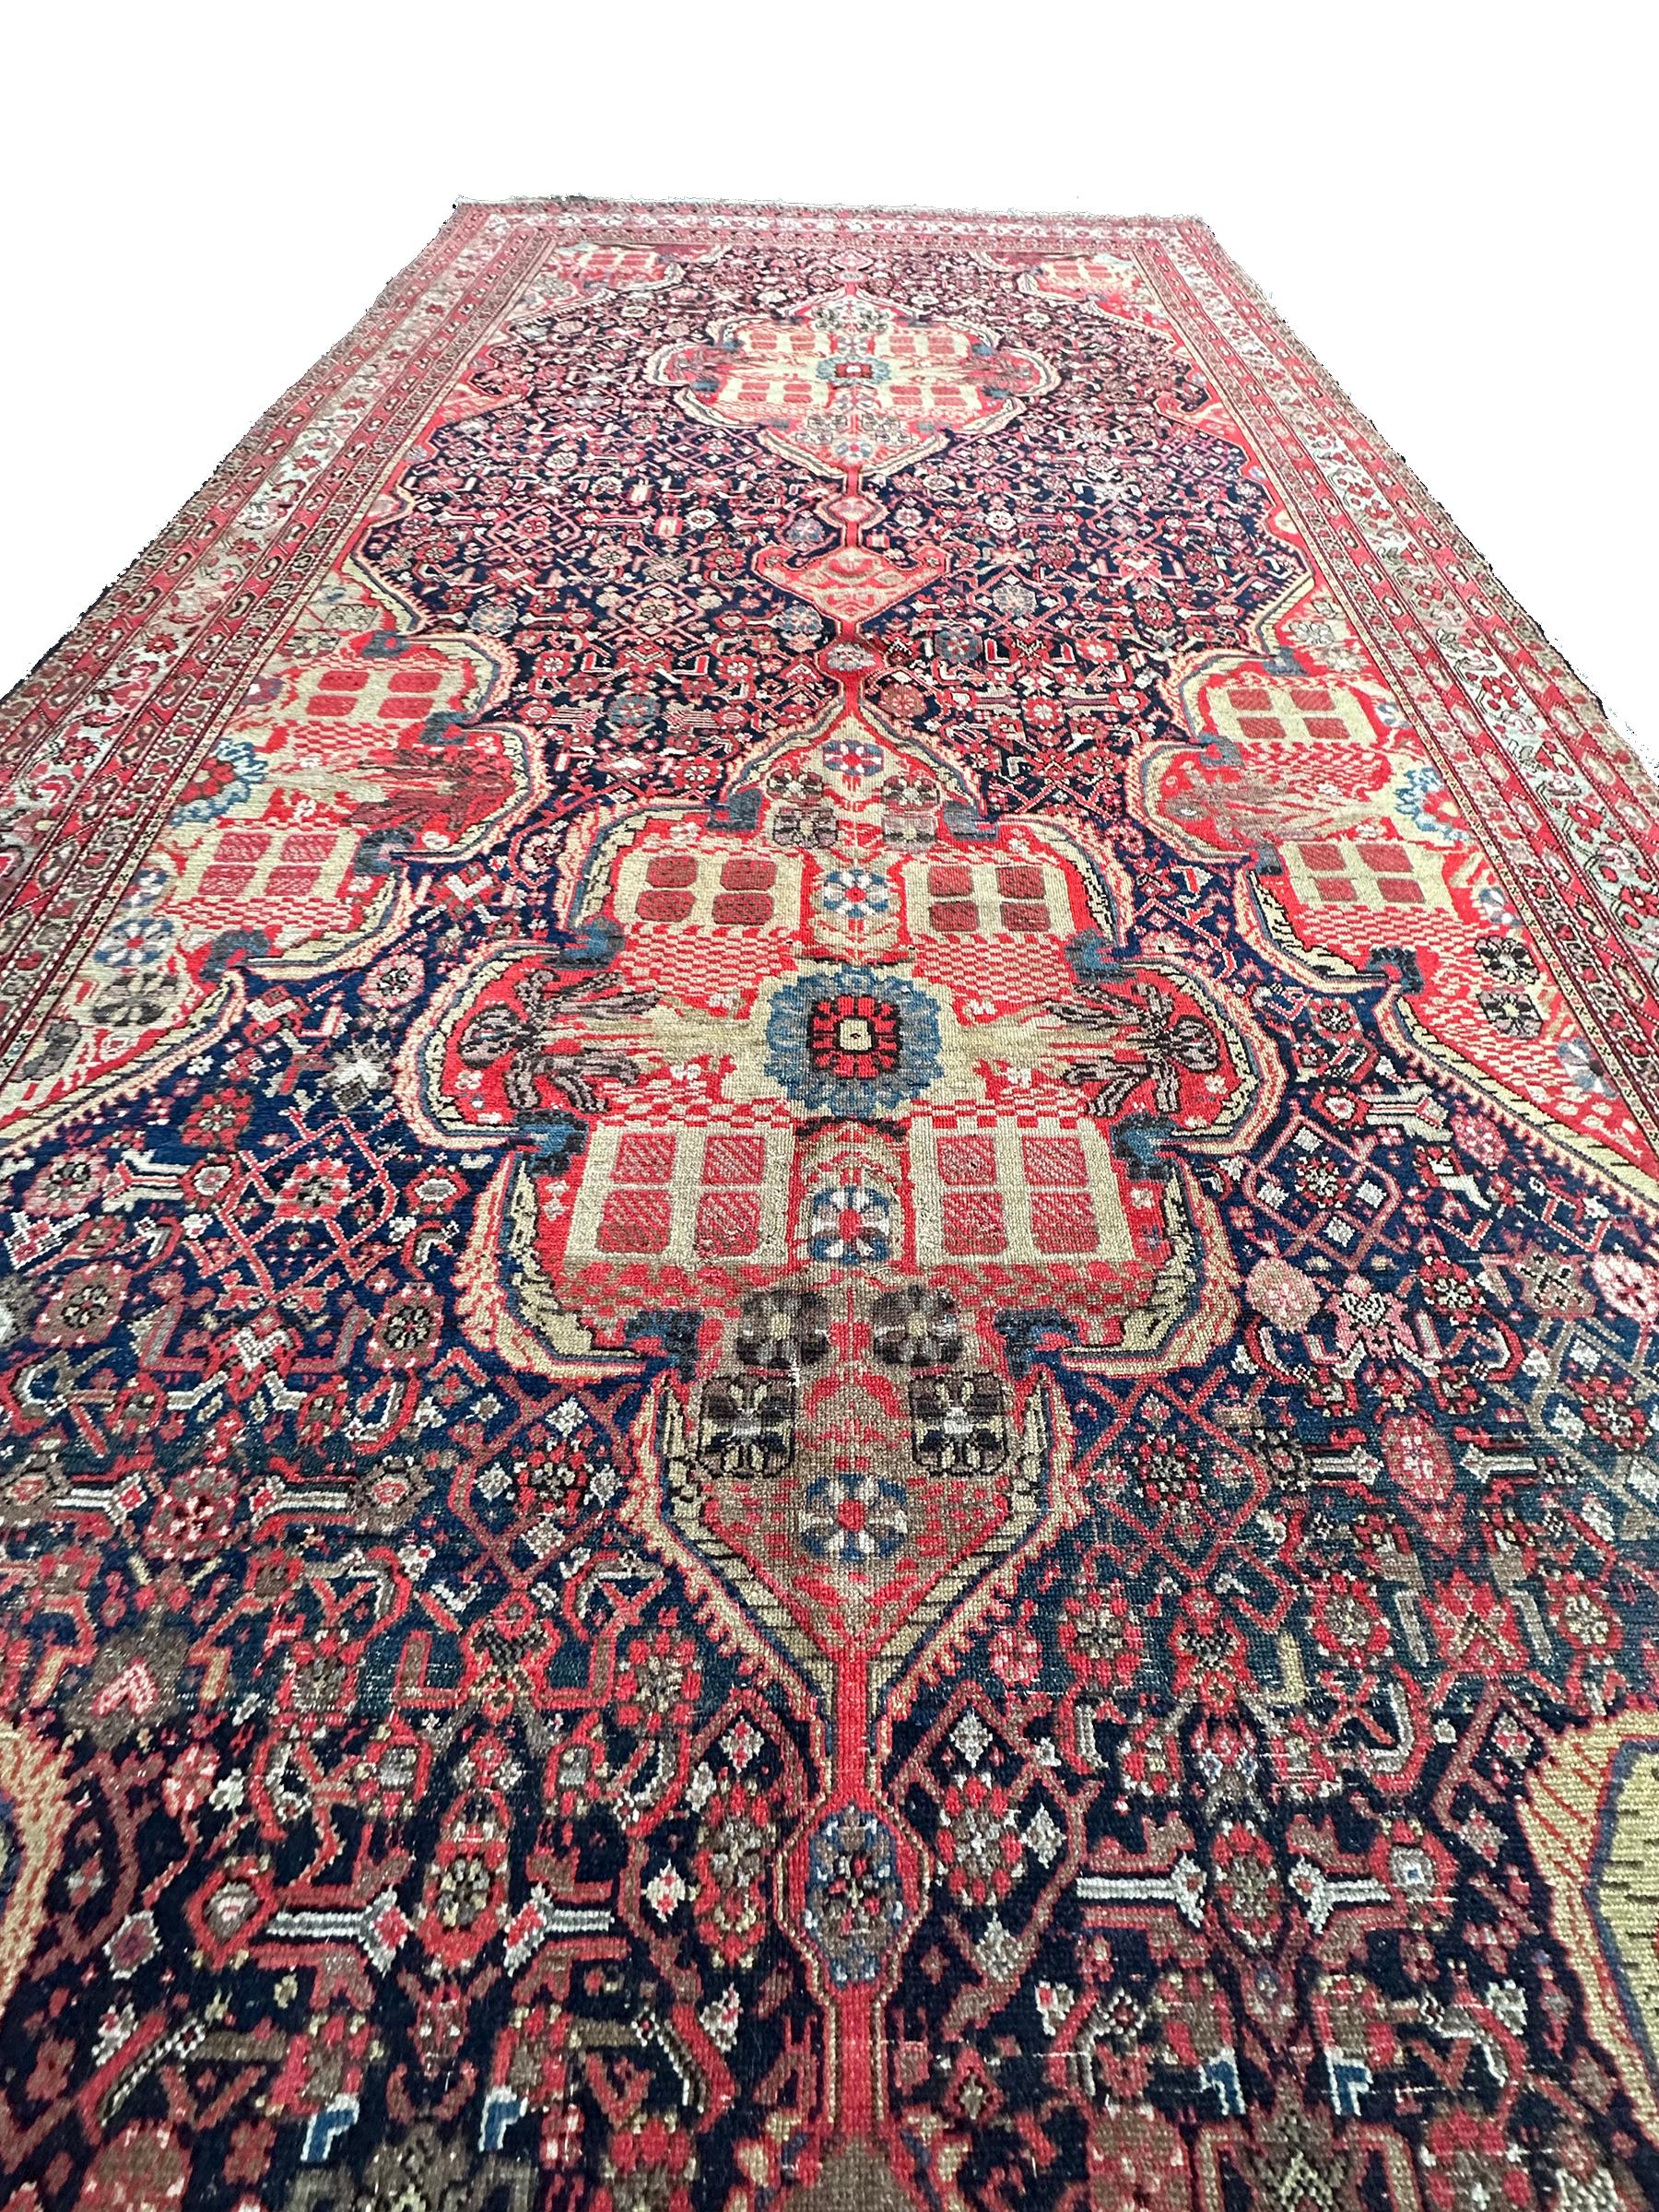 Antique Persian Mahal Sultanabad Rug 1880 Geometric 9x17 Handmade 257cm x 511cm In Good Condition For Sale In New York, NY